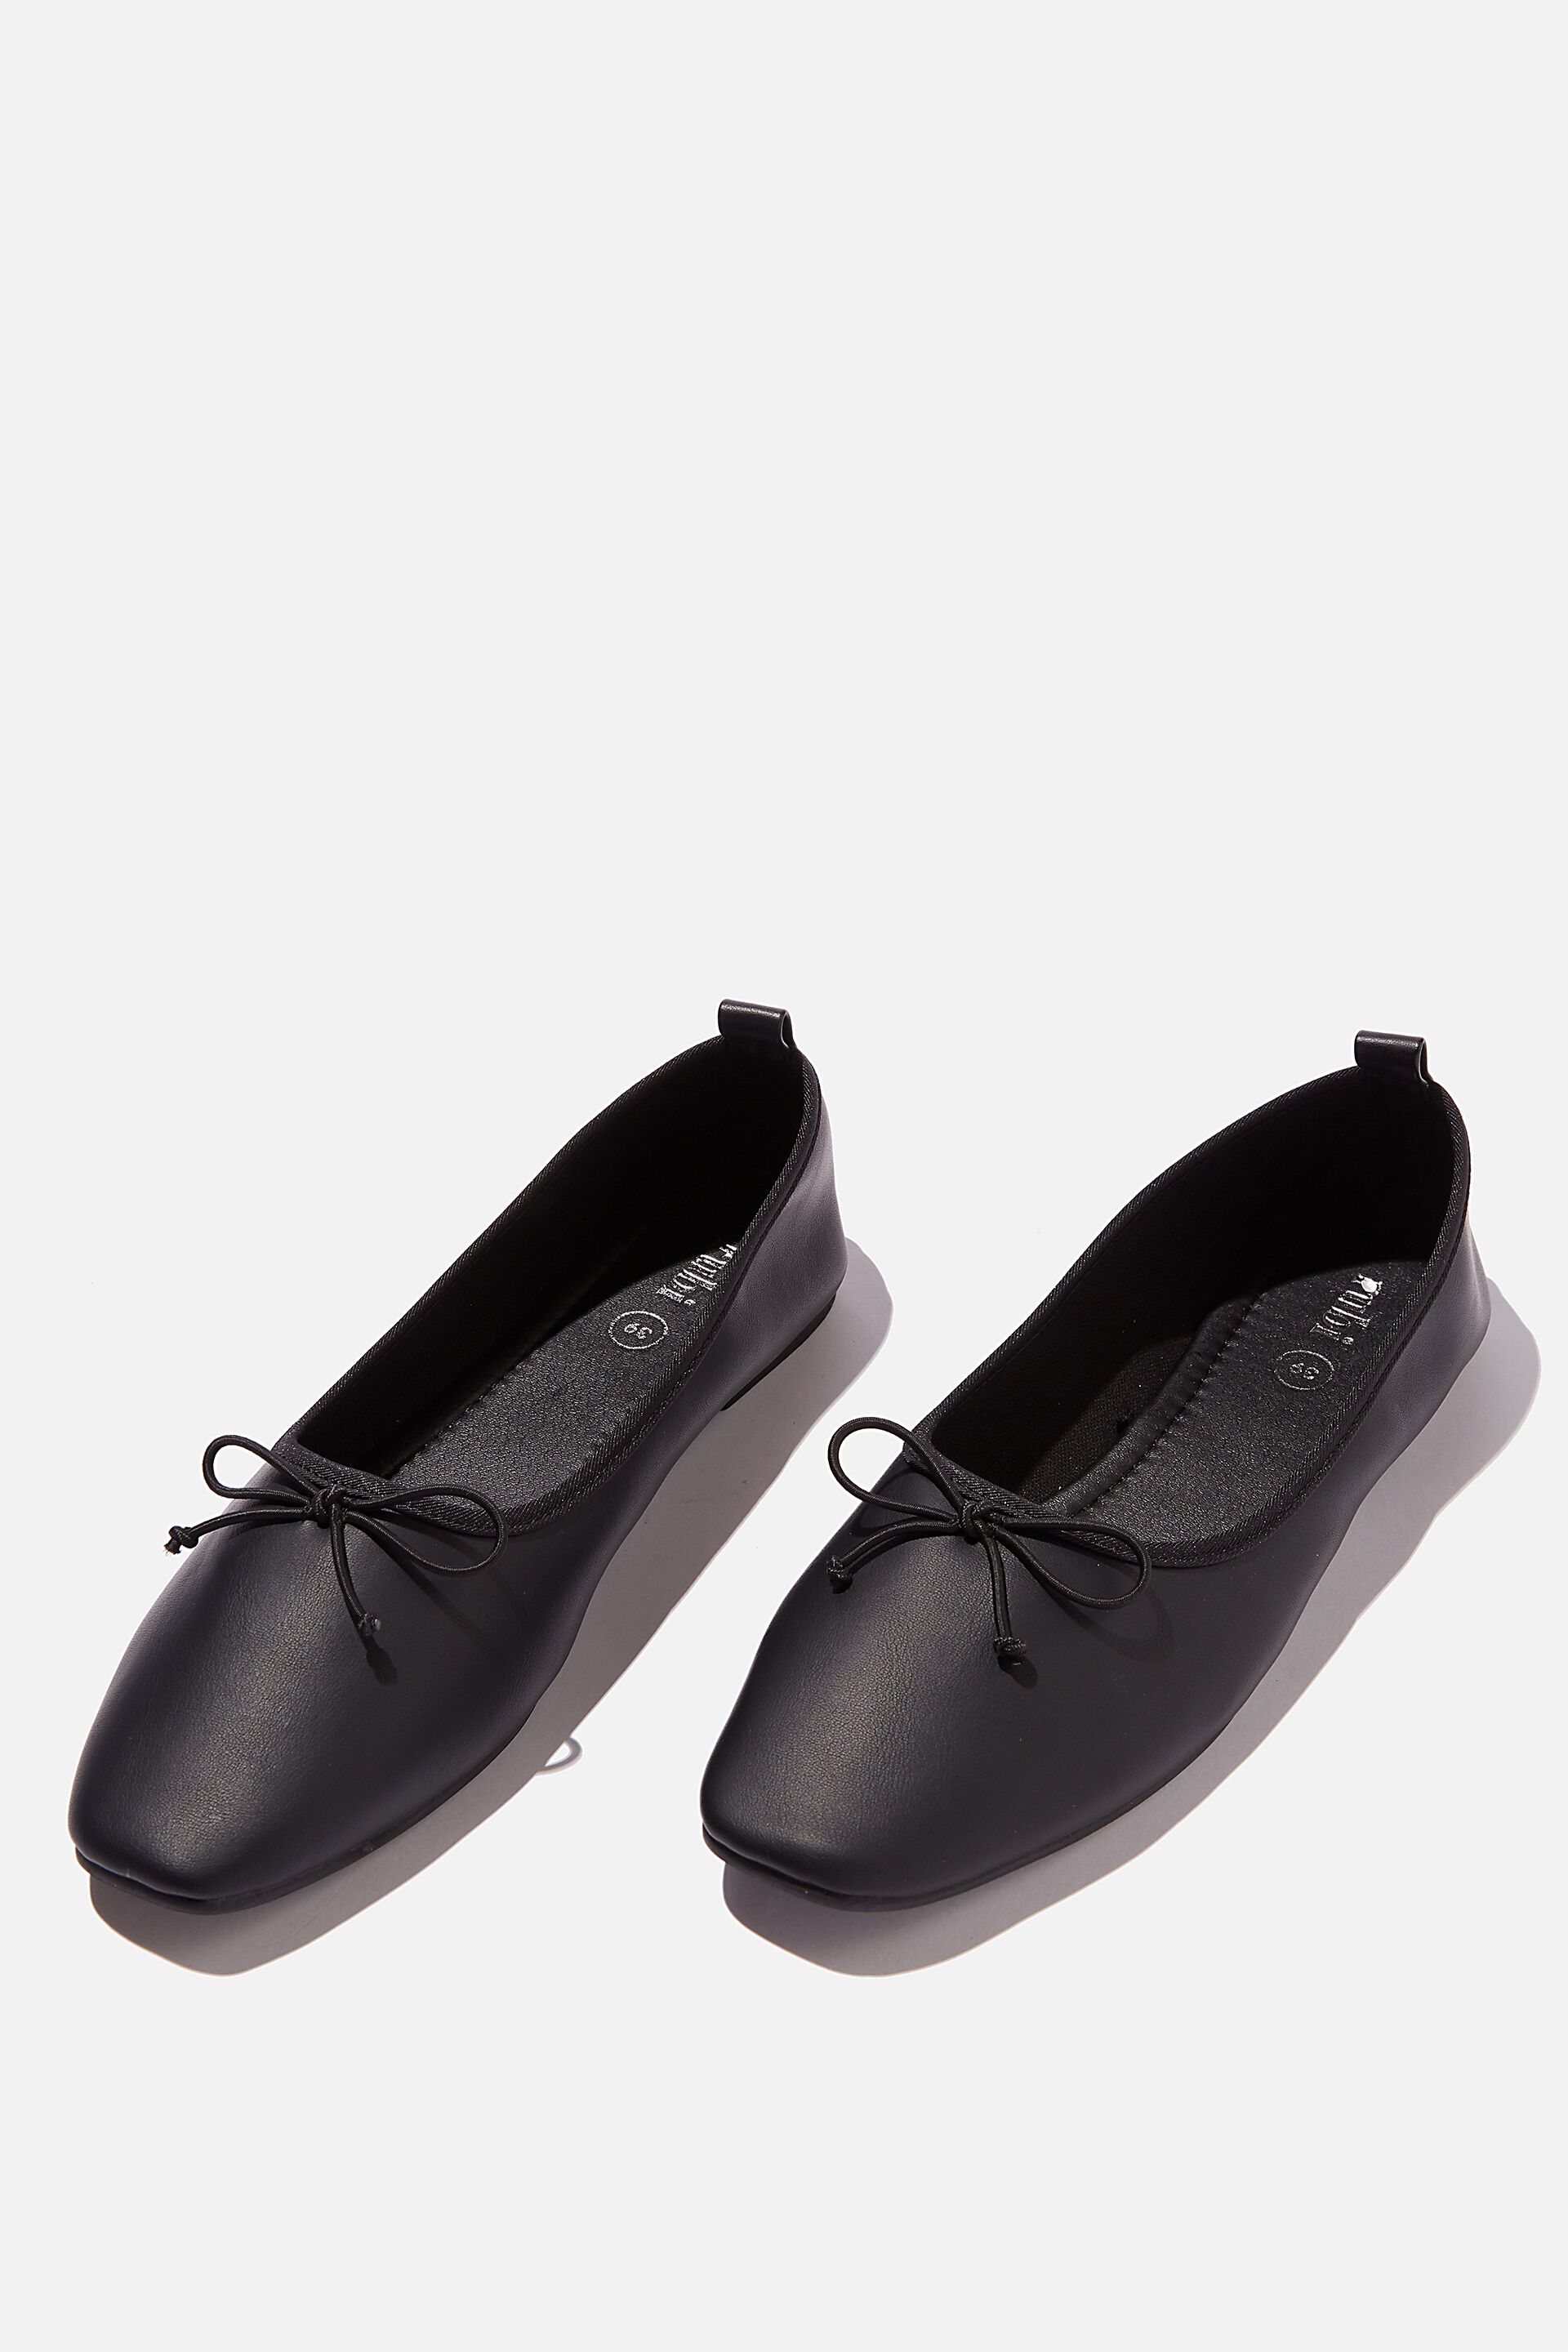 rubi shoes loafers